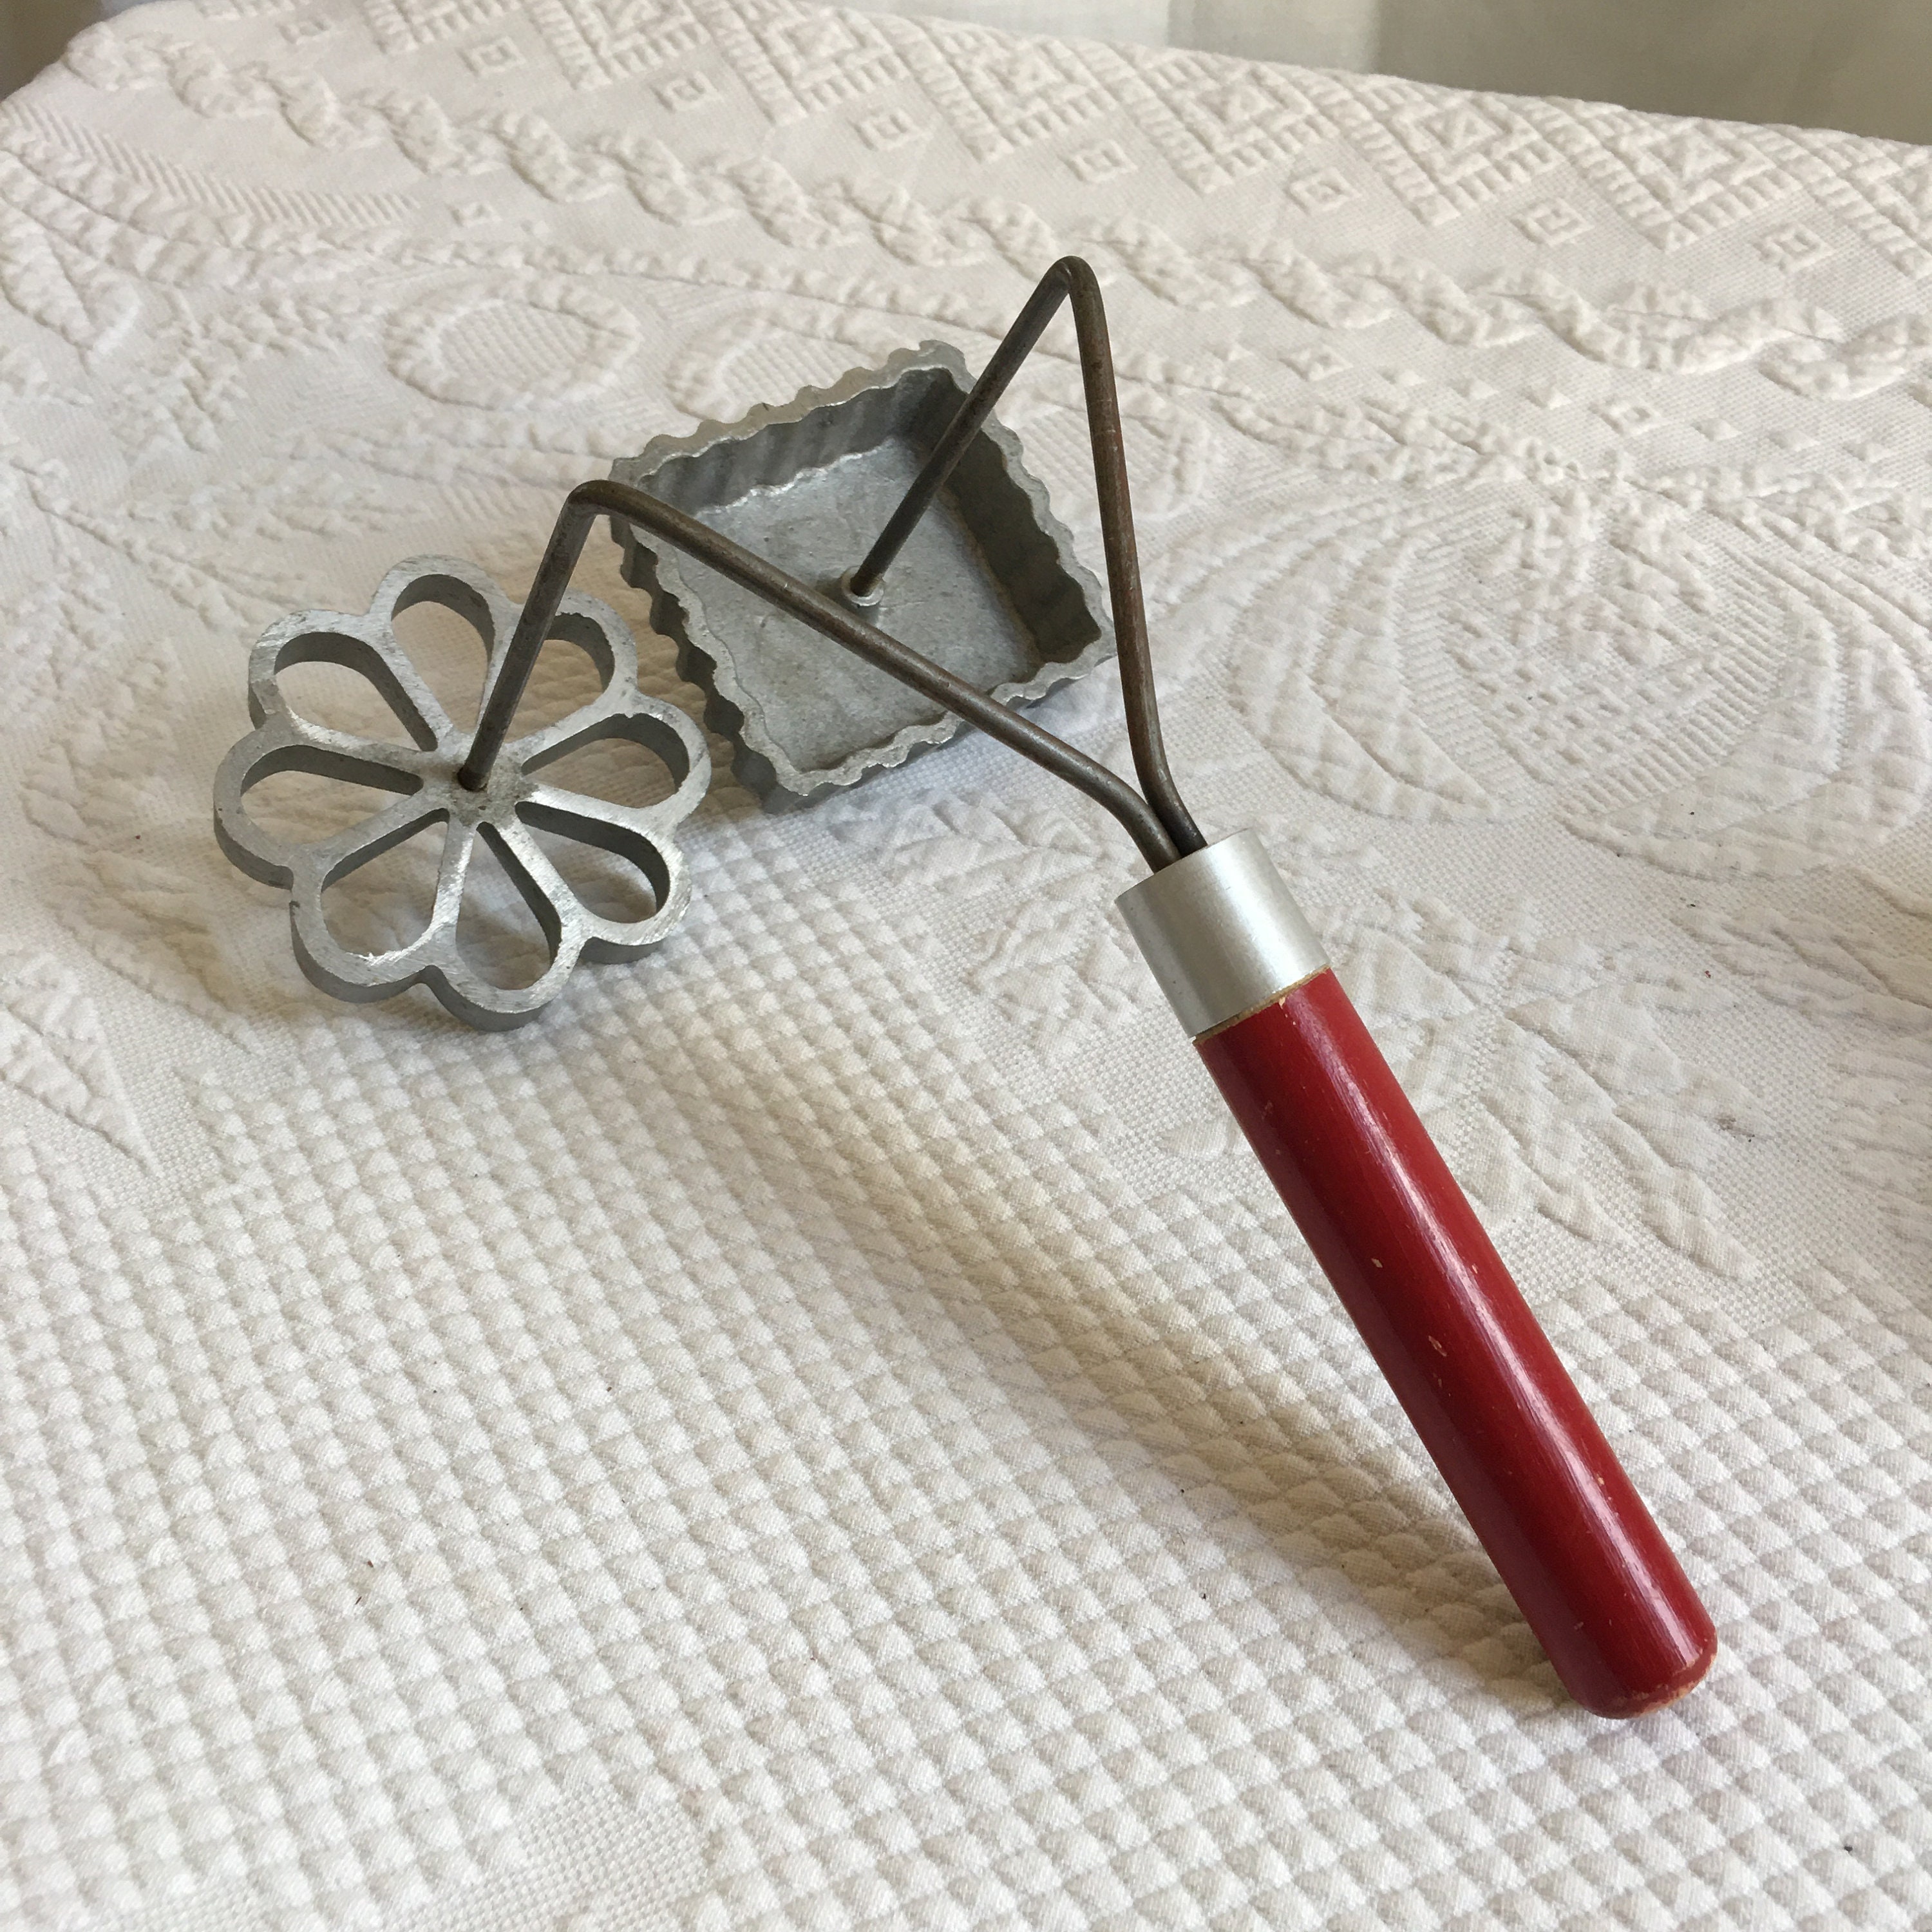 Vintage Metal Cookie Press Rosette Iron Mold with Handle and Irons